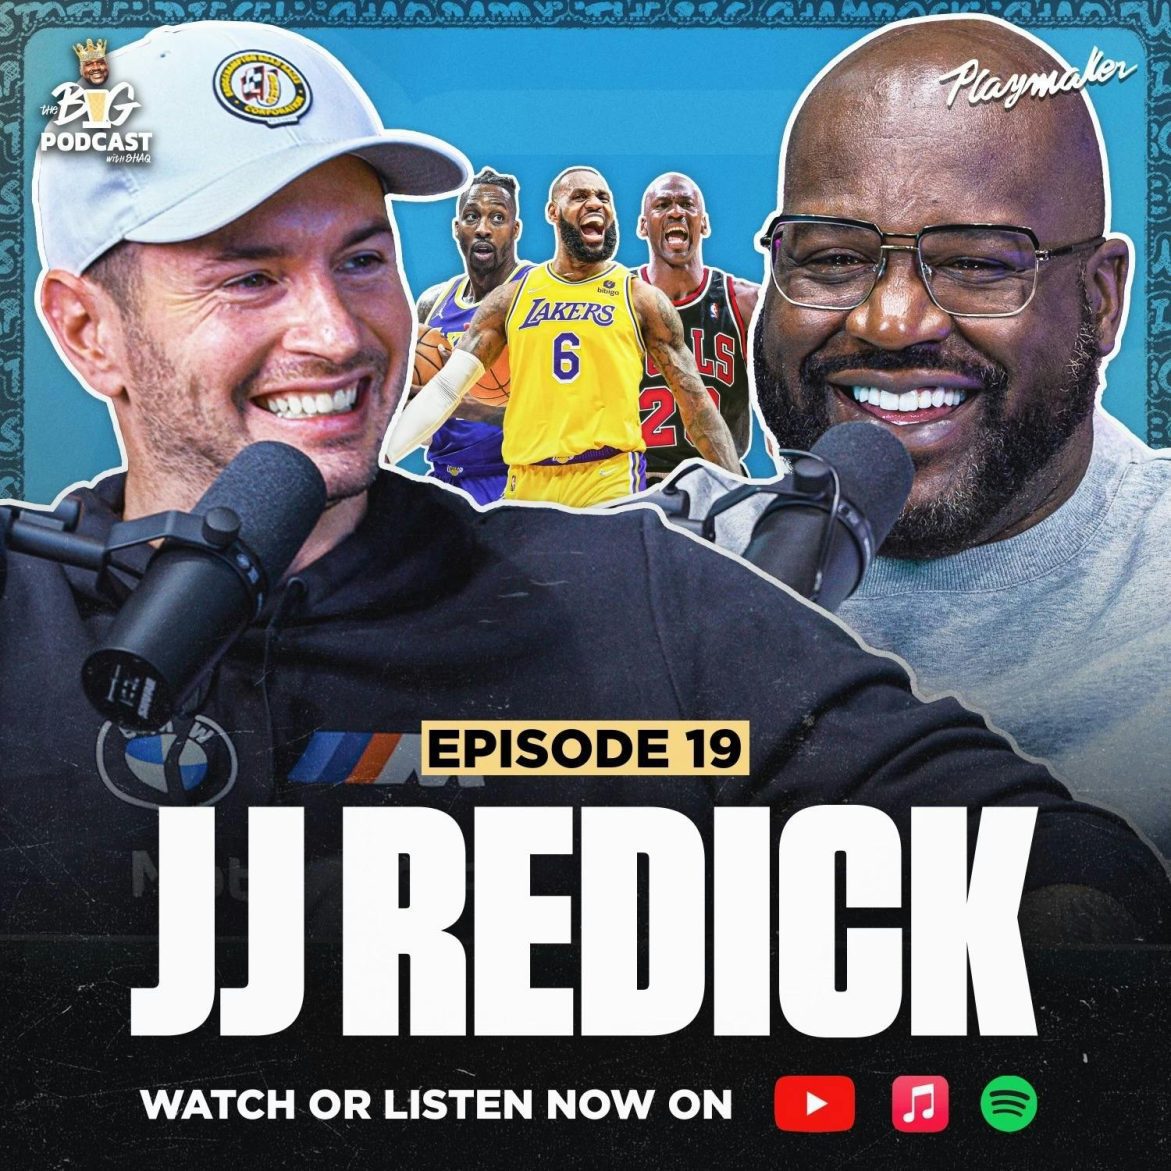 Black Podcasting - JJ Redick Calls Shaq A Hater, Rants Over GOAT Debate, NBA Playoffs, and more  | Ep 19